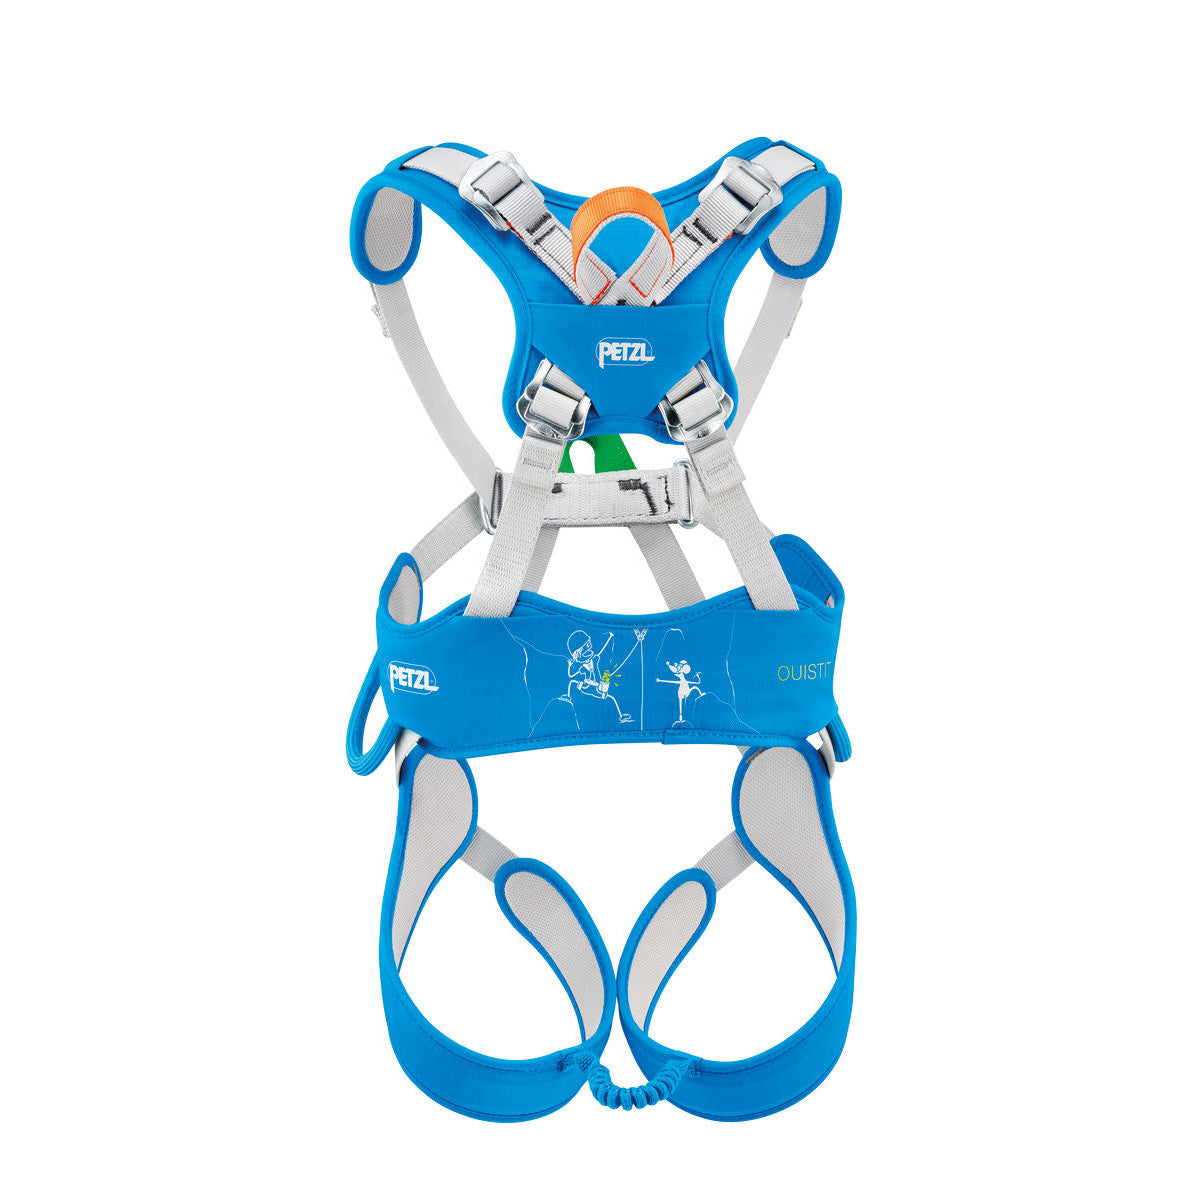 Petzl Ouistiti Kids climbing Harness, front/side view, in Blue and Grey colours